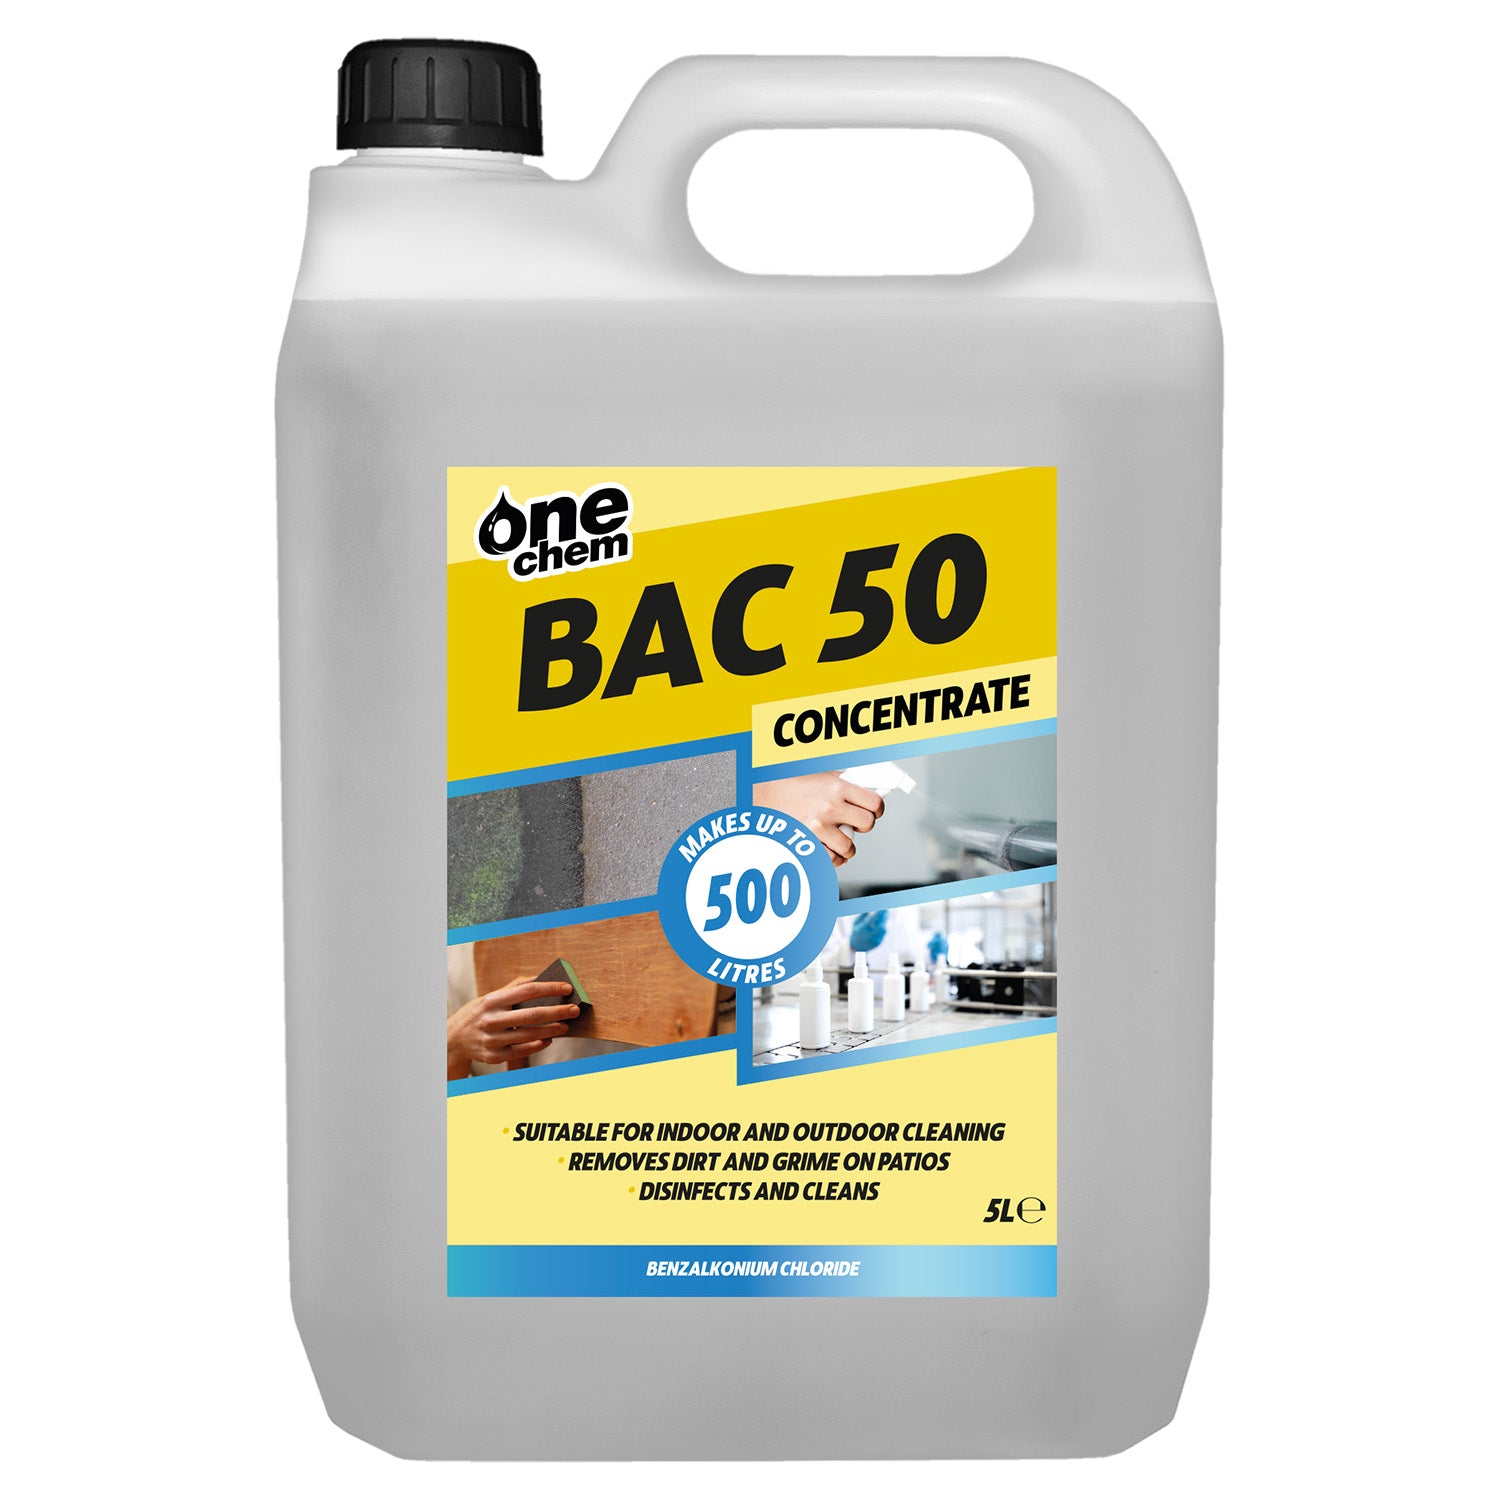 One Chem - BAC 50 Benzalkonium Chloride Concentrated 2 x 5L